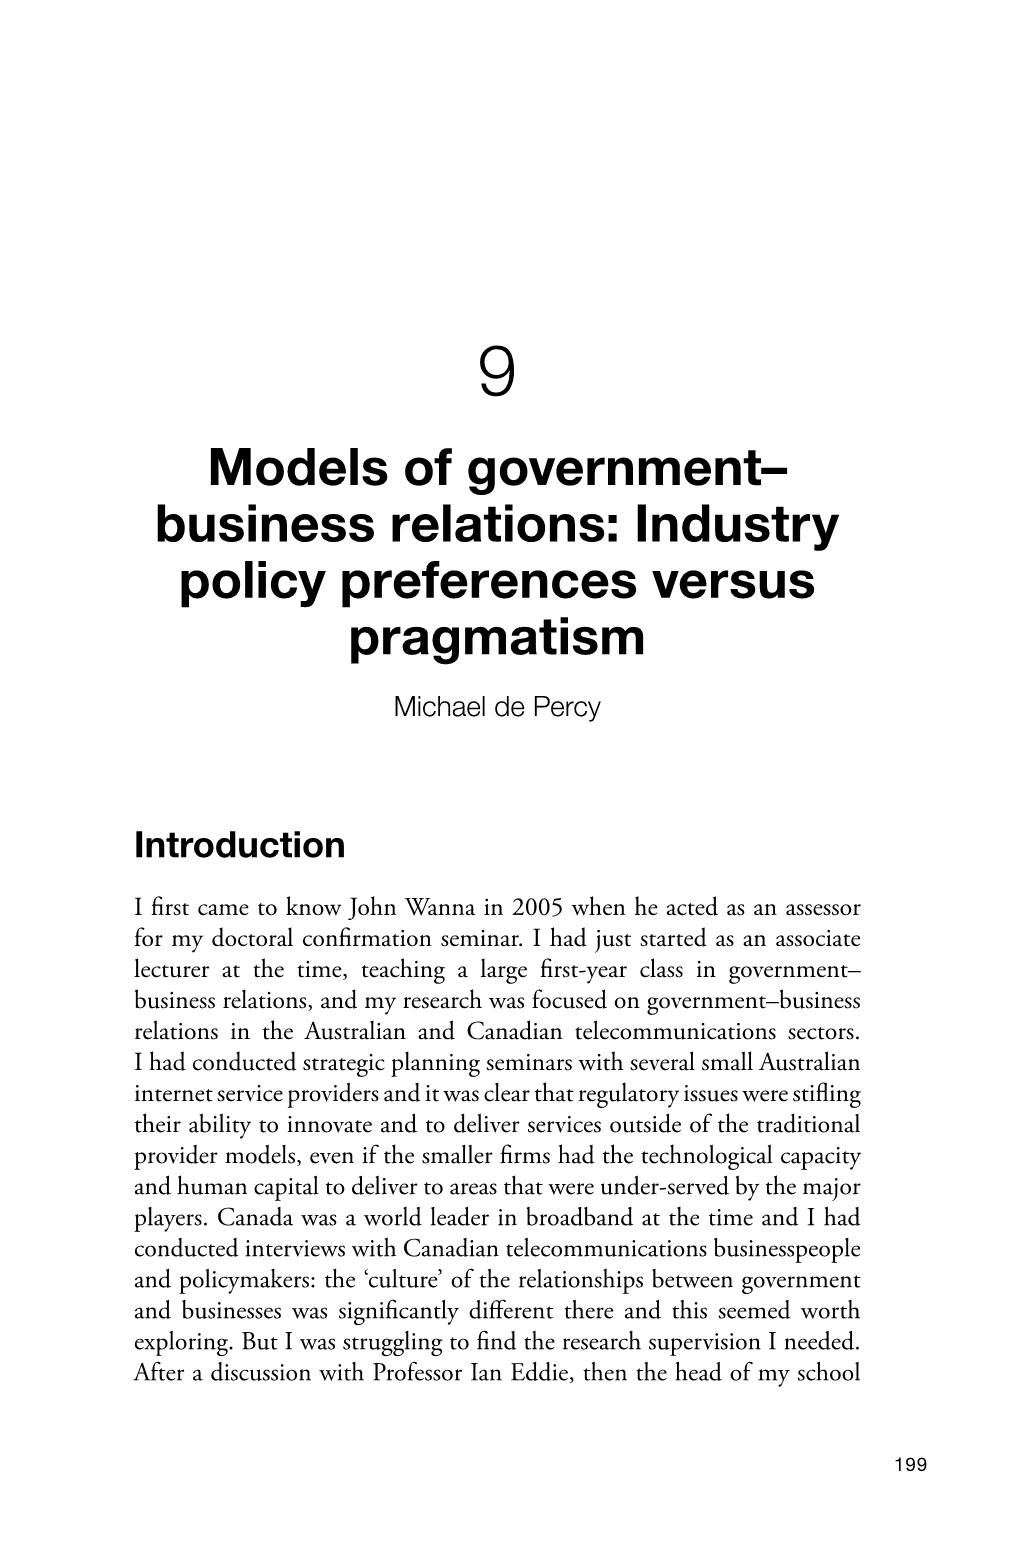 9. Models of Government–Business Relations